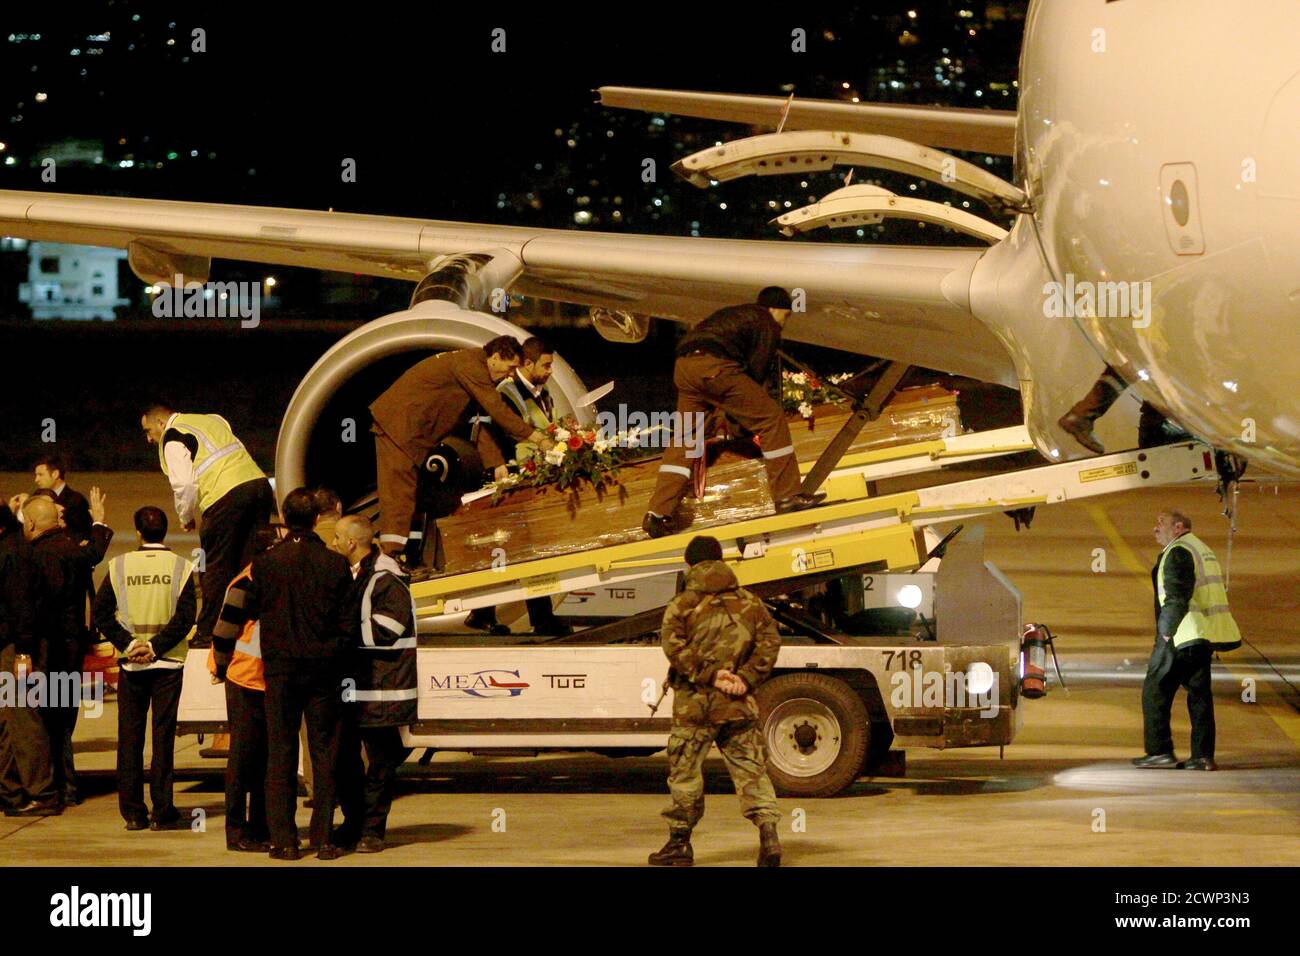 The coffins carrying the bodies of victims of a private plane that crashed yesterday in the city of Sulaimaniya in Iraq's semi-autonomous northern Kurdish region, are transported upon arrival at the Beirut international airport, February 5, 2011. The chief executive of private equity group MerchantBridge and two JPMorgan executives were among seven people killed when a small plane crashed in northern Iraq, officials said on Saturday. Airport officials said the businessmen on the plane had flown to Sulaimaniya to visit the offices of AsiaCell, one of Iraq's major mobile phone service providers, Stock Photo